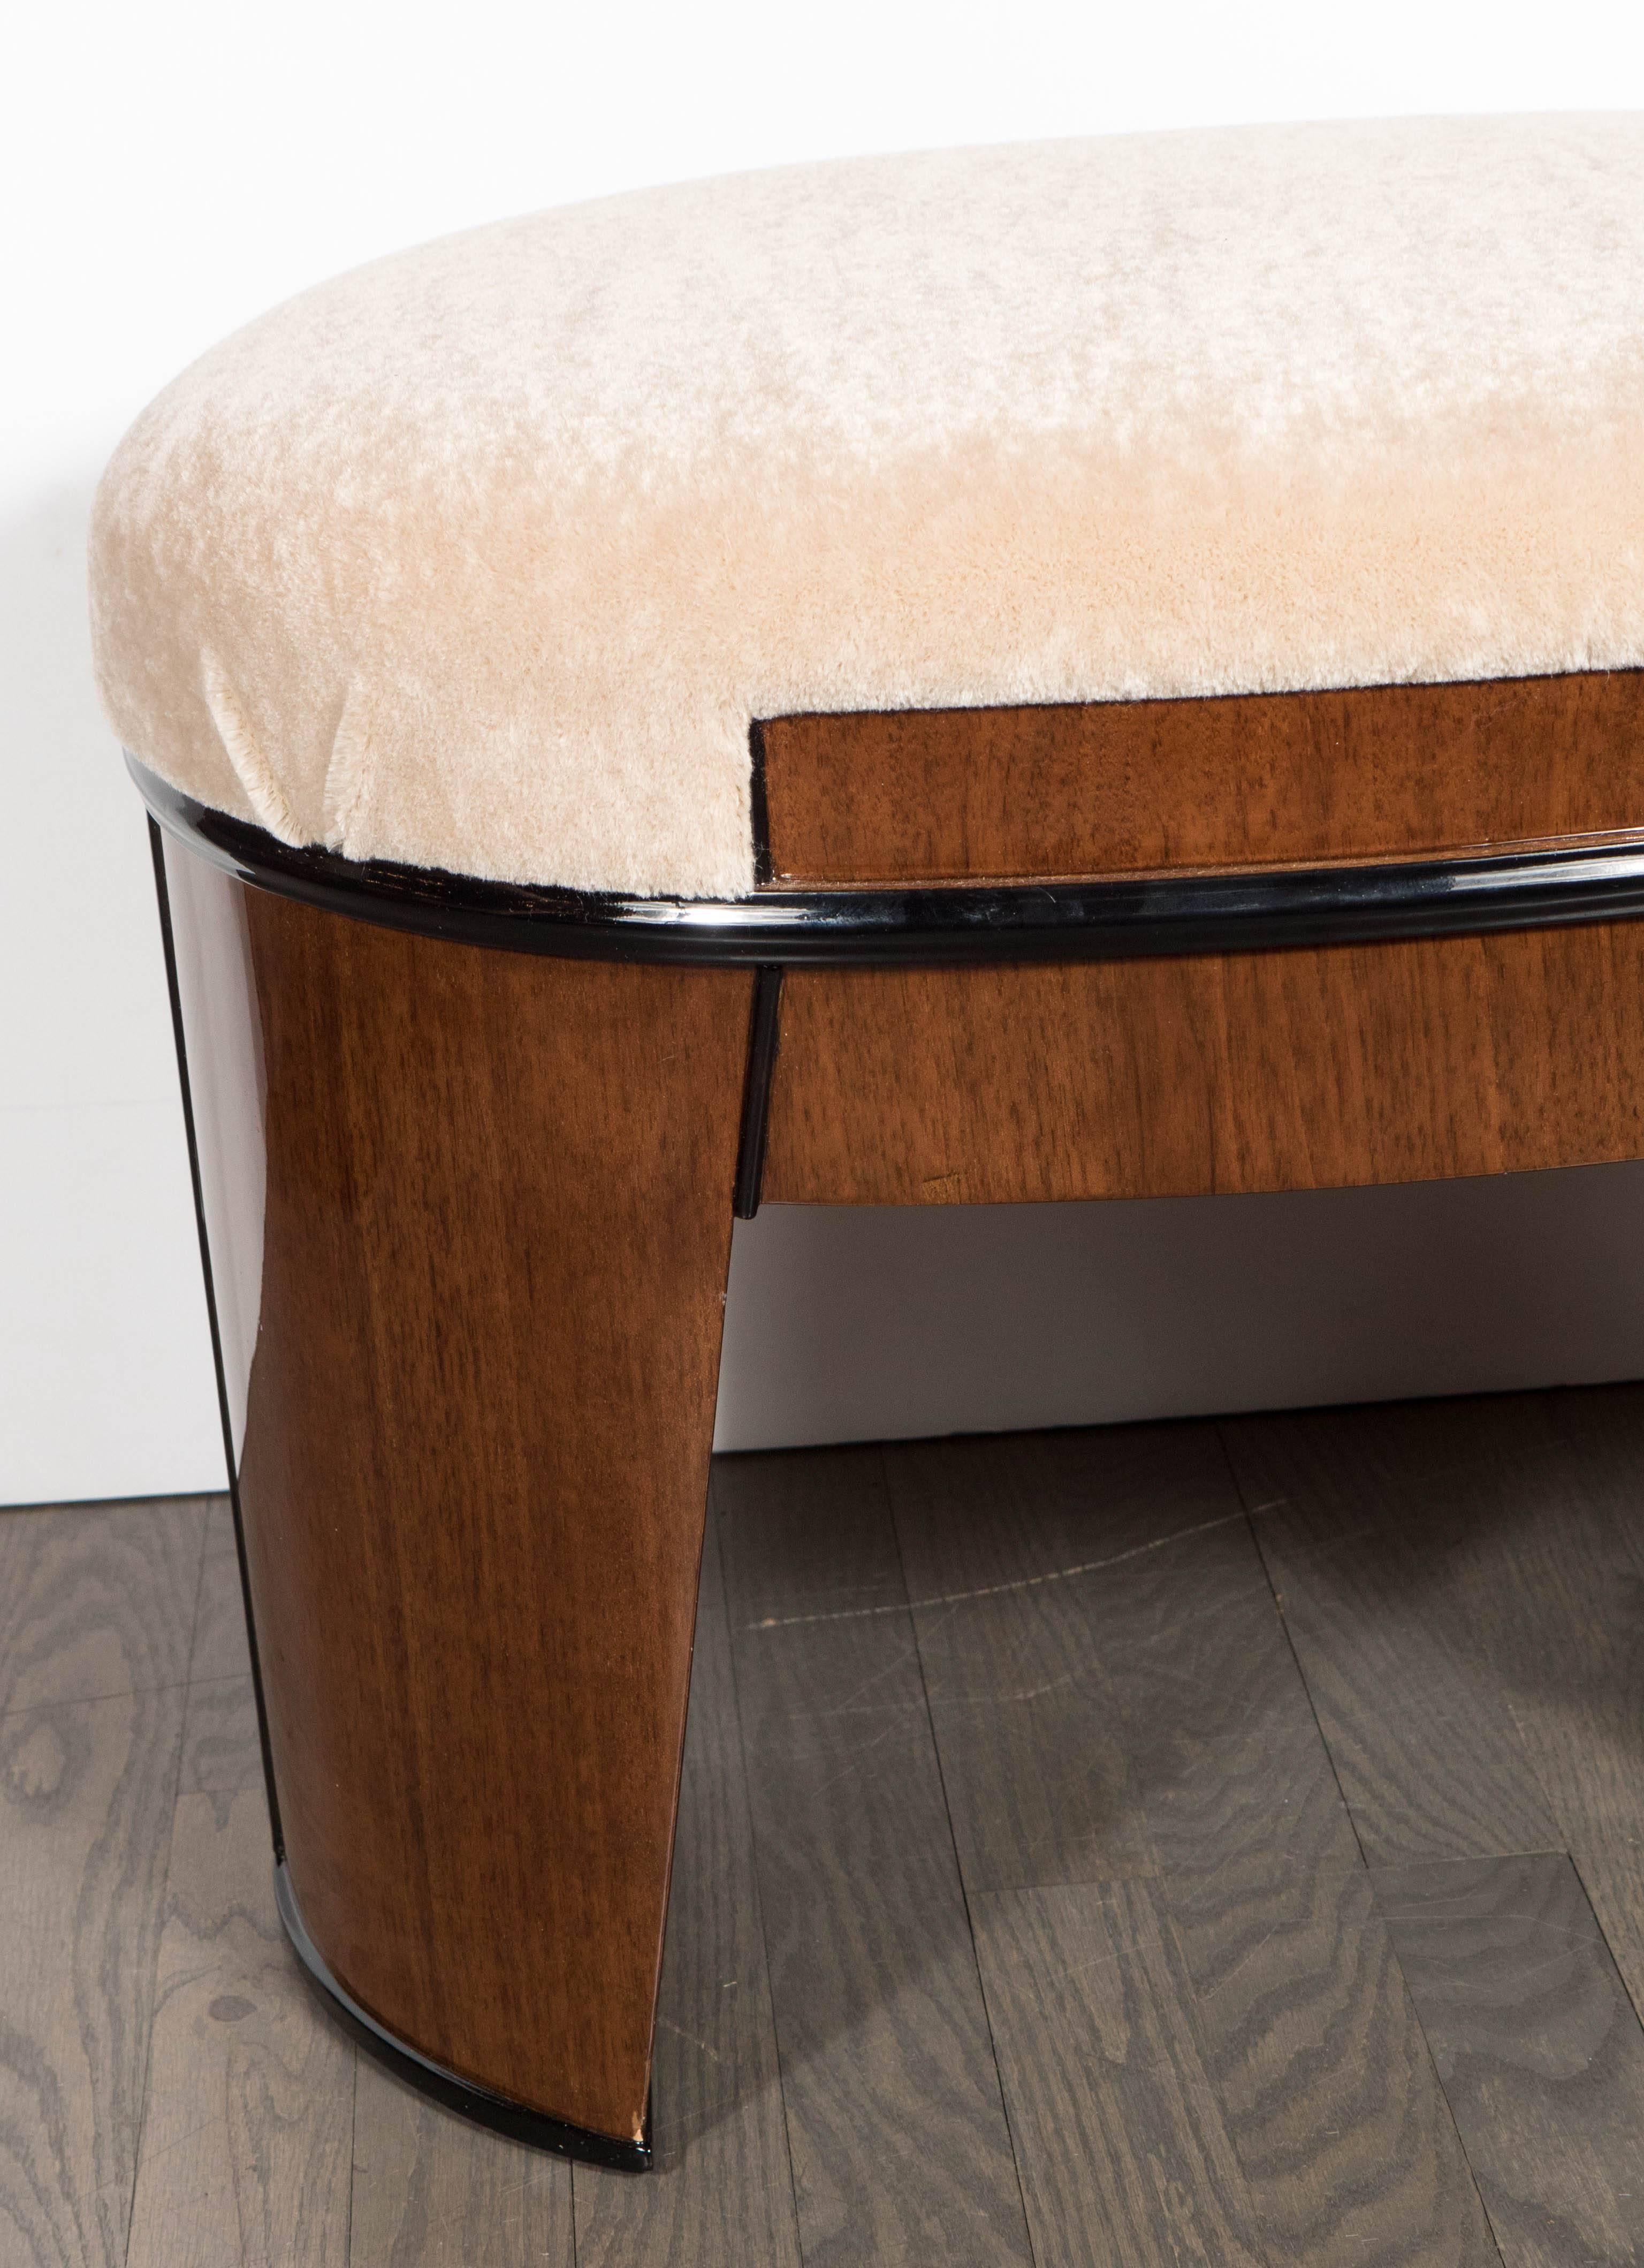 This exceptional Art Deco skyscraper style stool features a streamlined ovoid design with a tapered cut-out style leg in bookmatched walnut with a black lacquer trim and new camel mohair upholstery. Restored to mint condition.